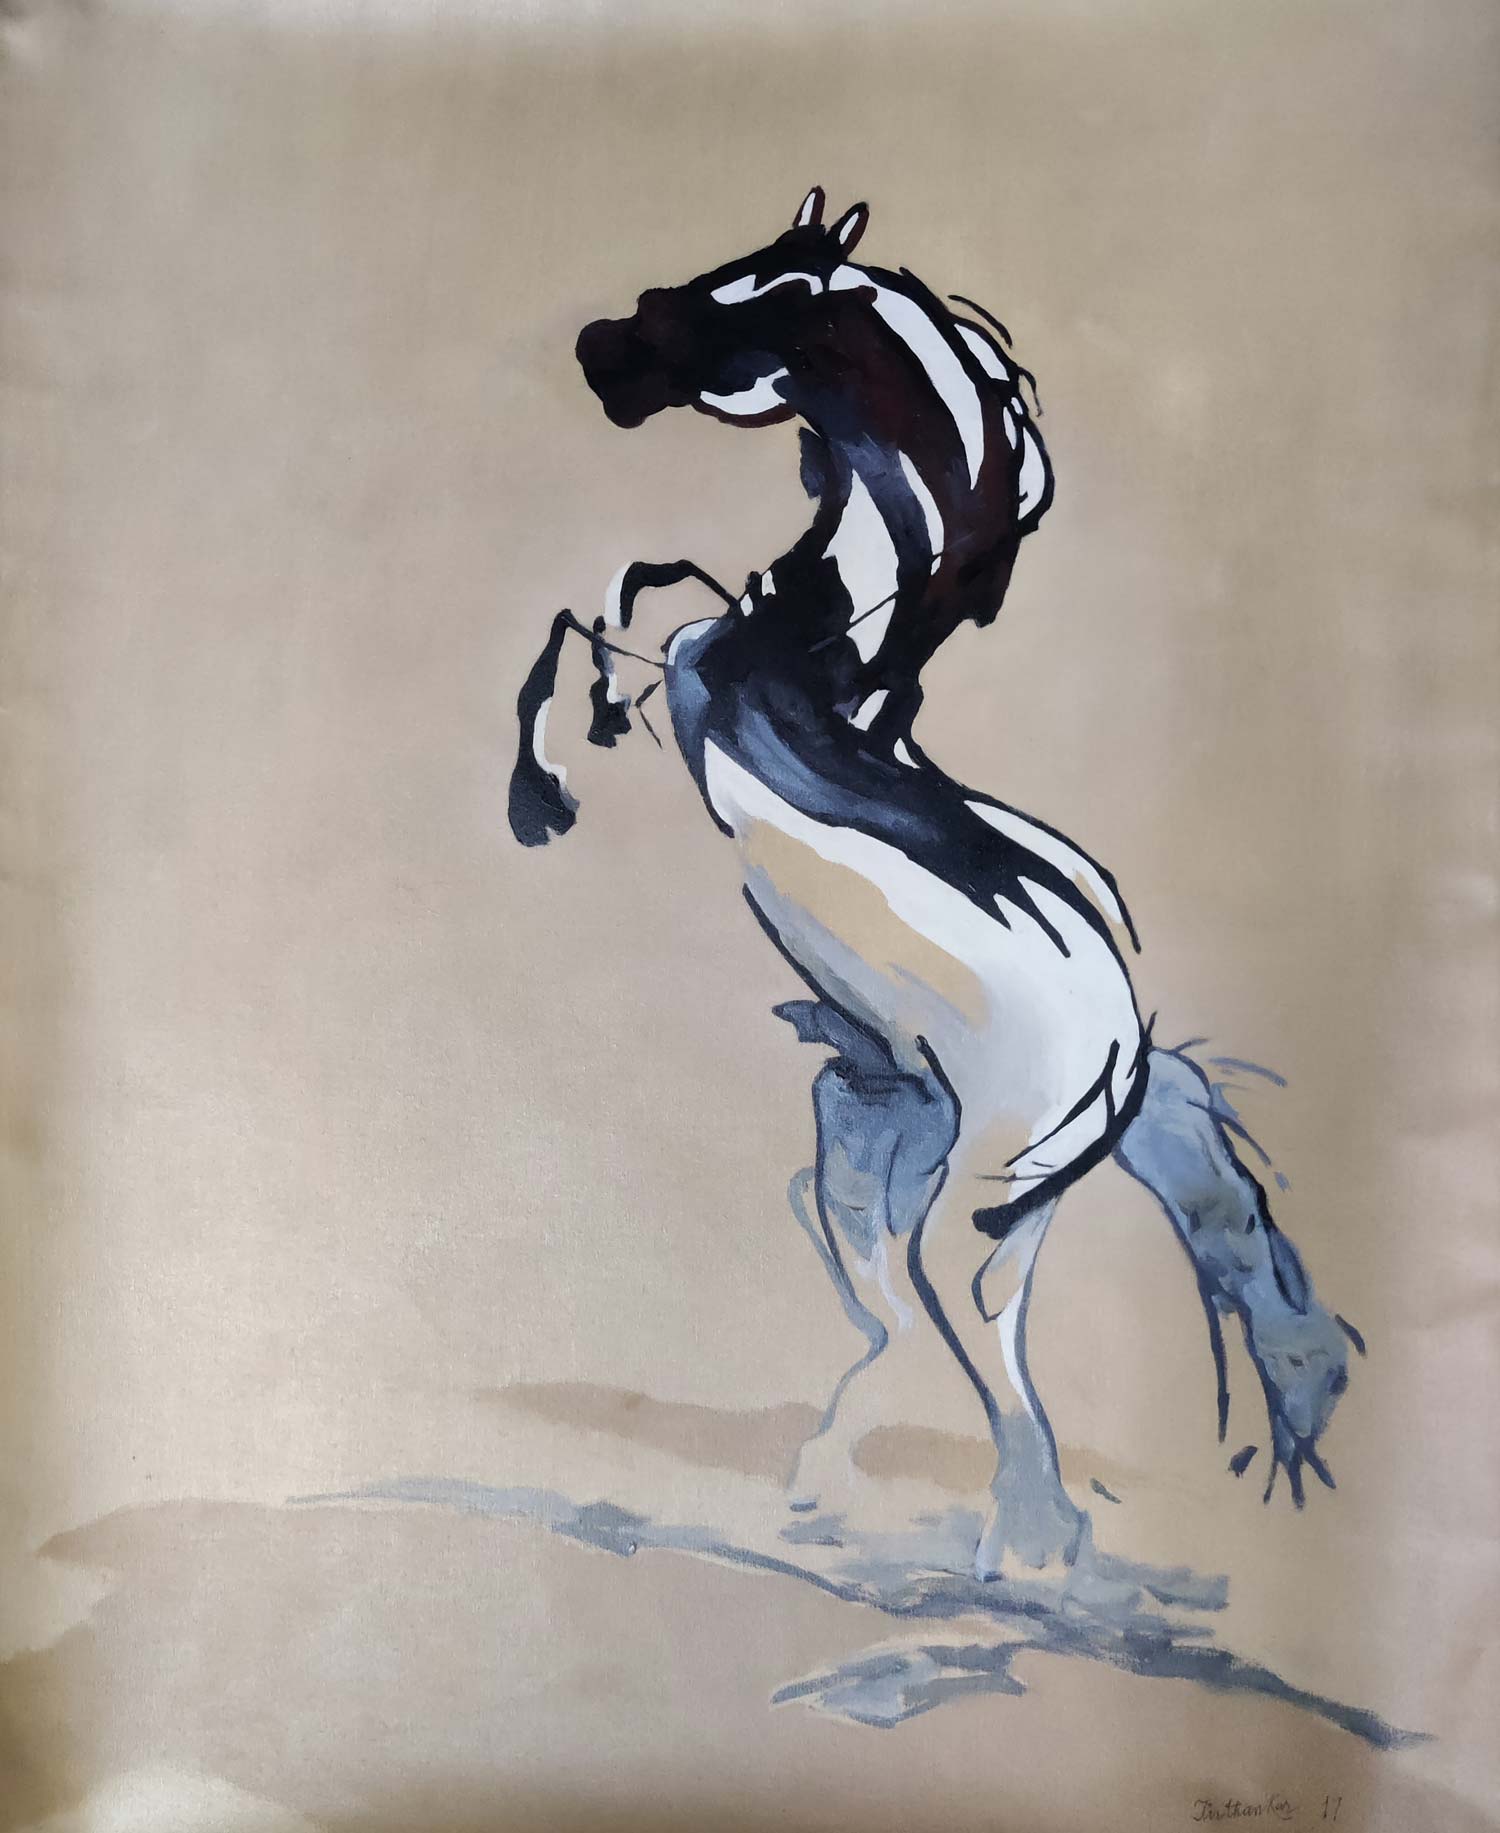 Figurative Painting with Oil on Canvas "Horse" art by Tirthankar Biswas